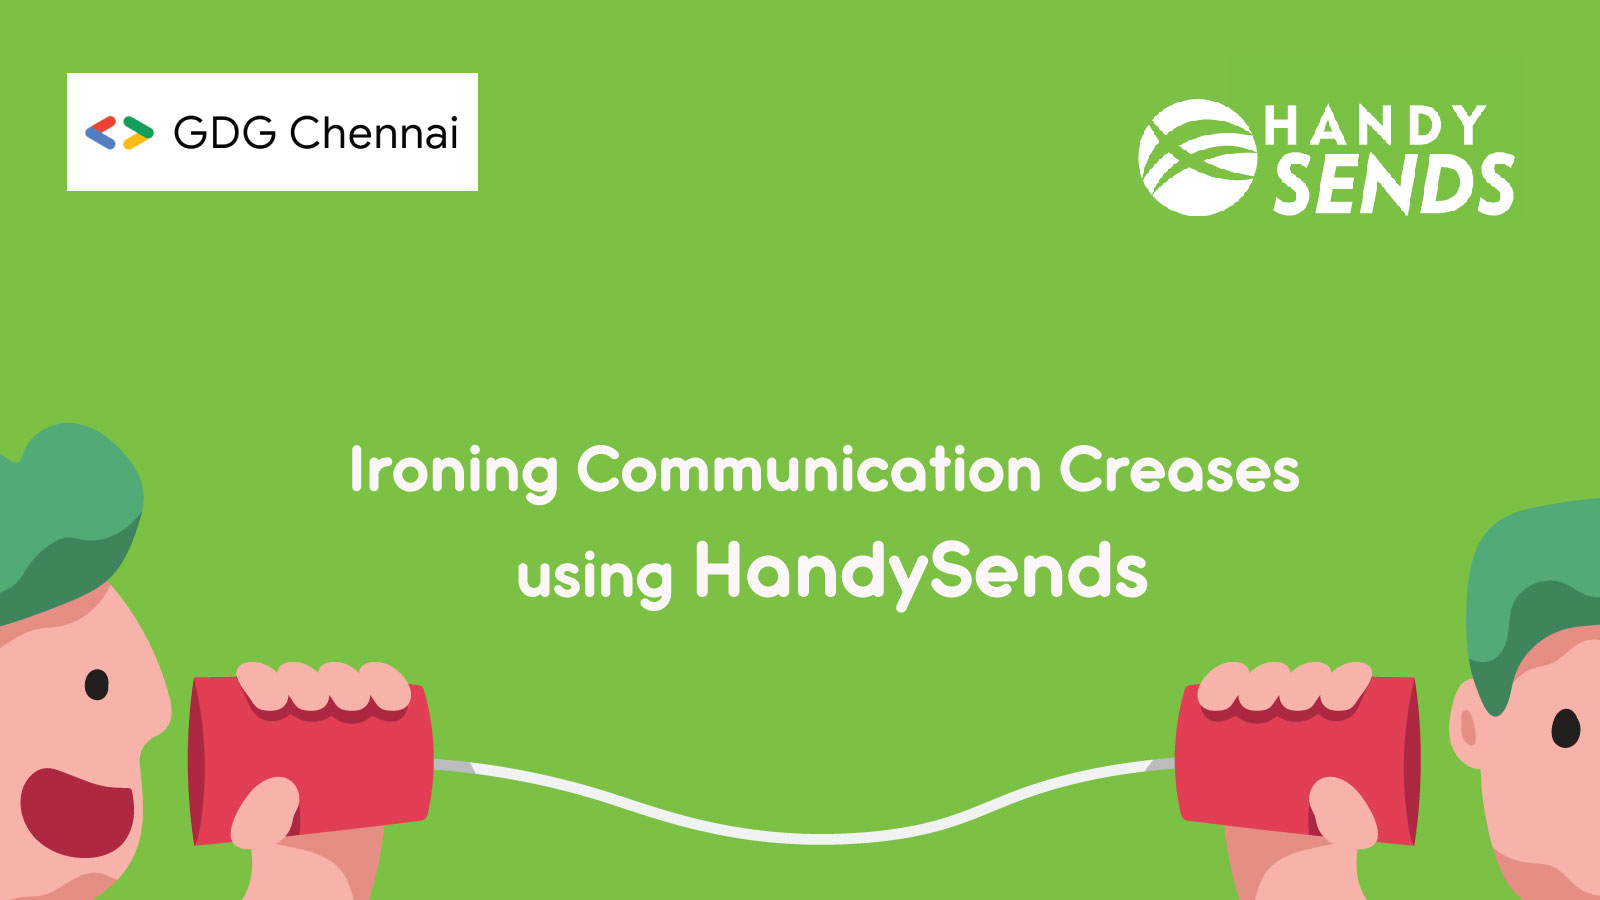 Understand what DEVELOPERS think about HandySends